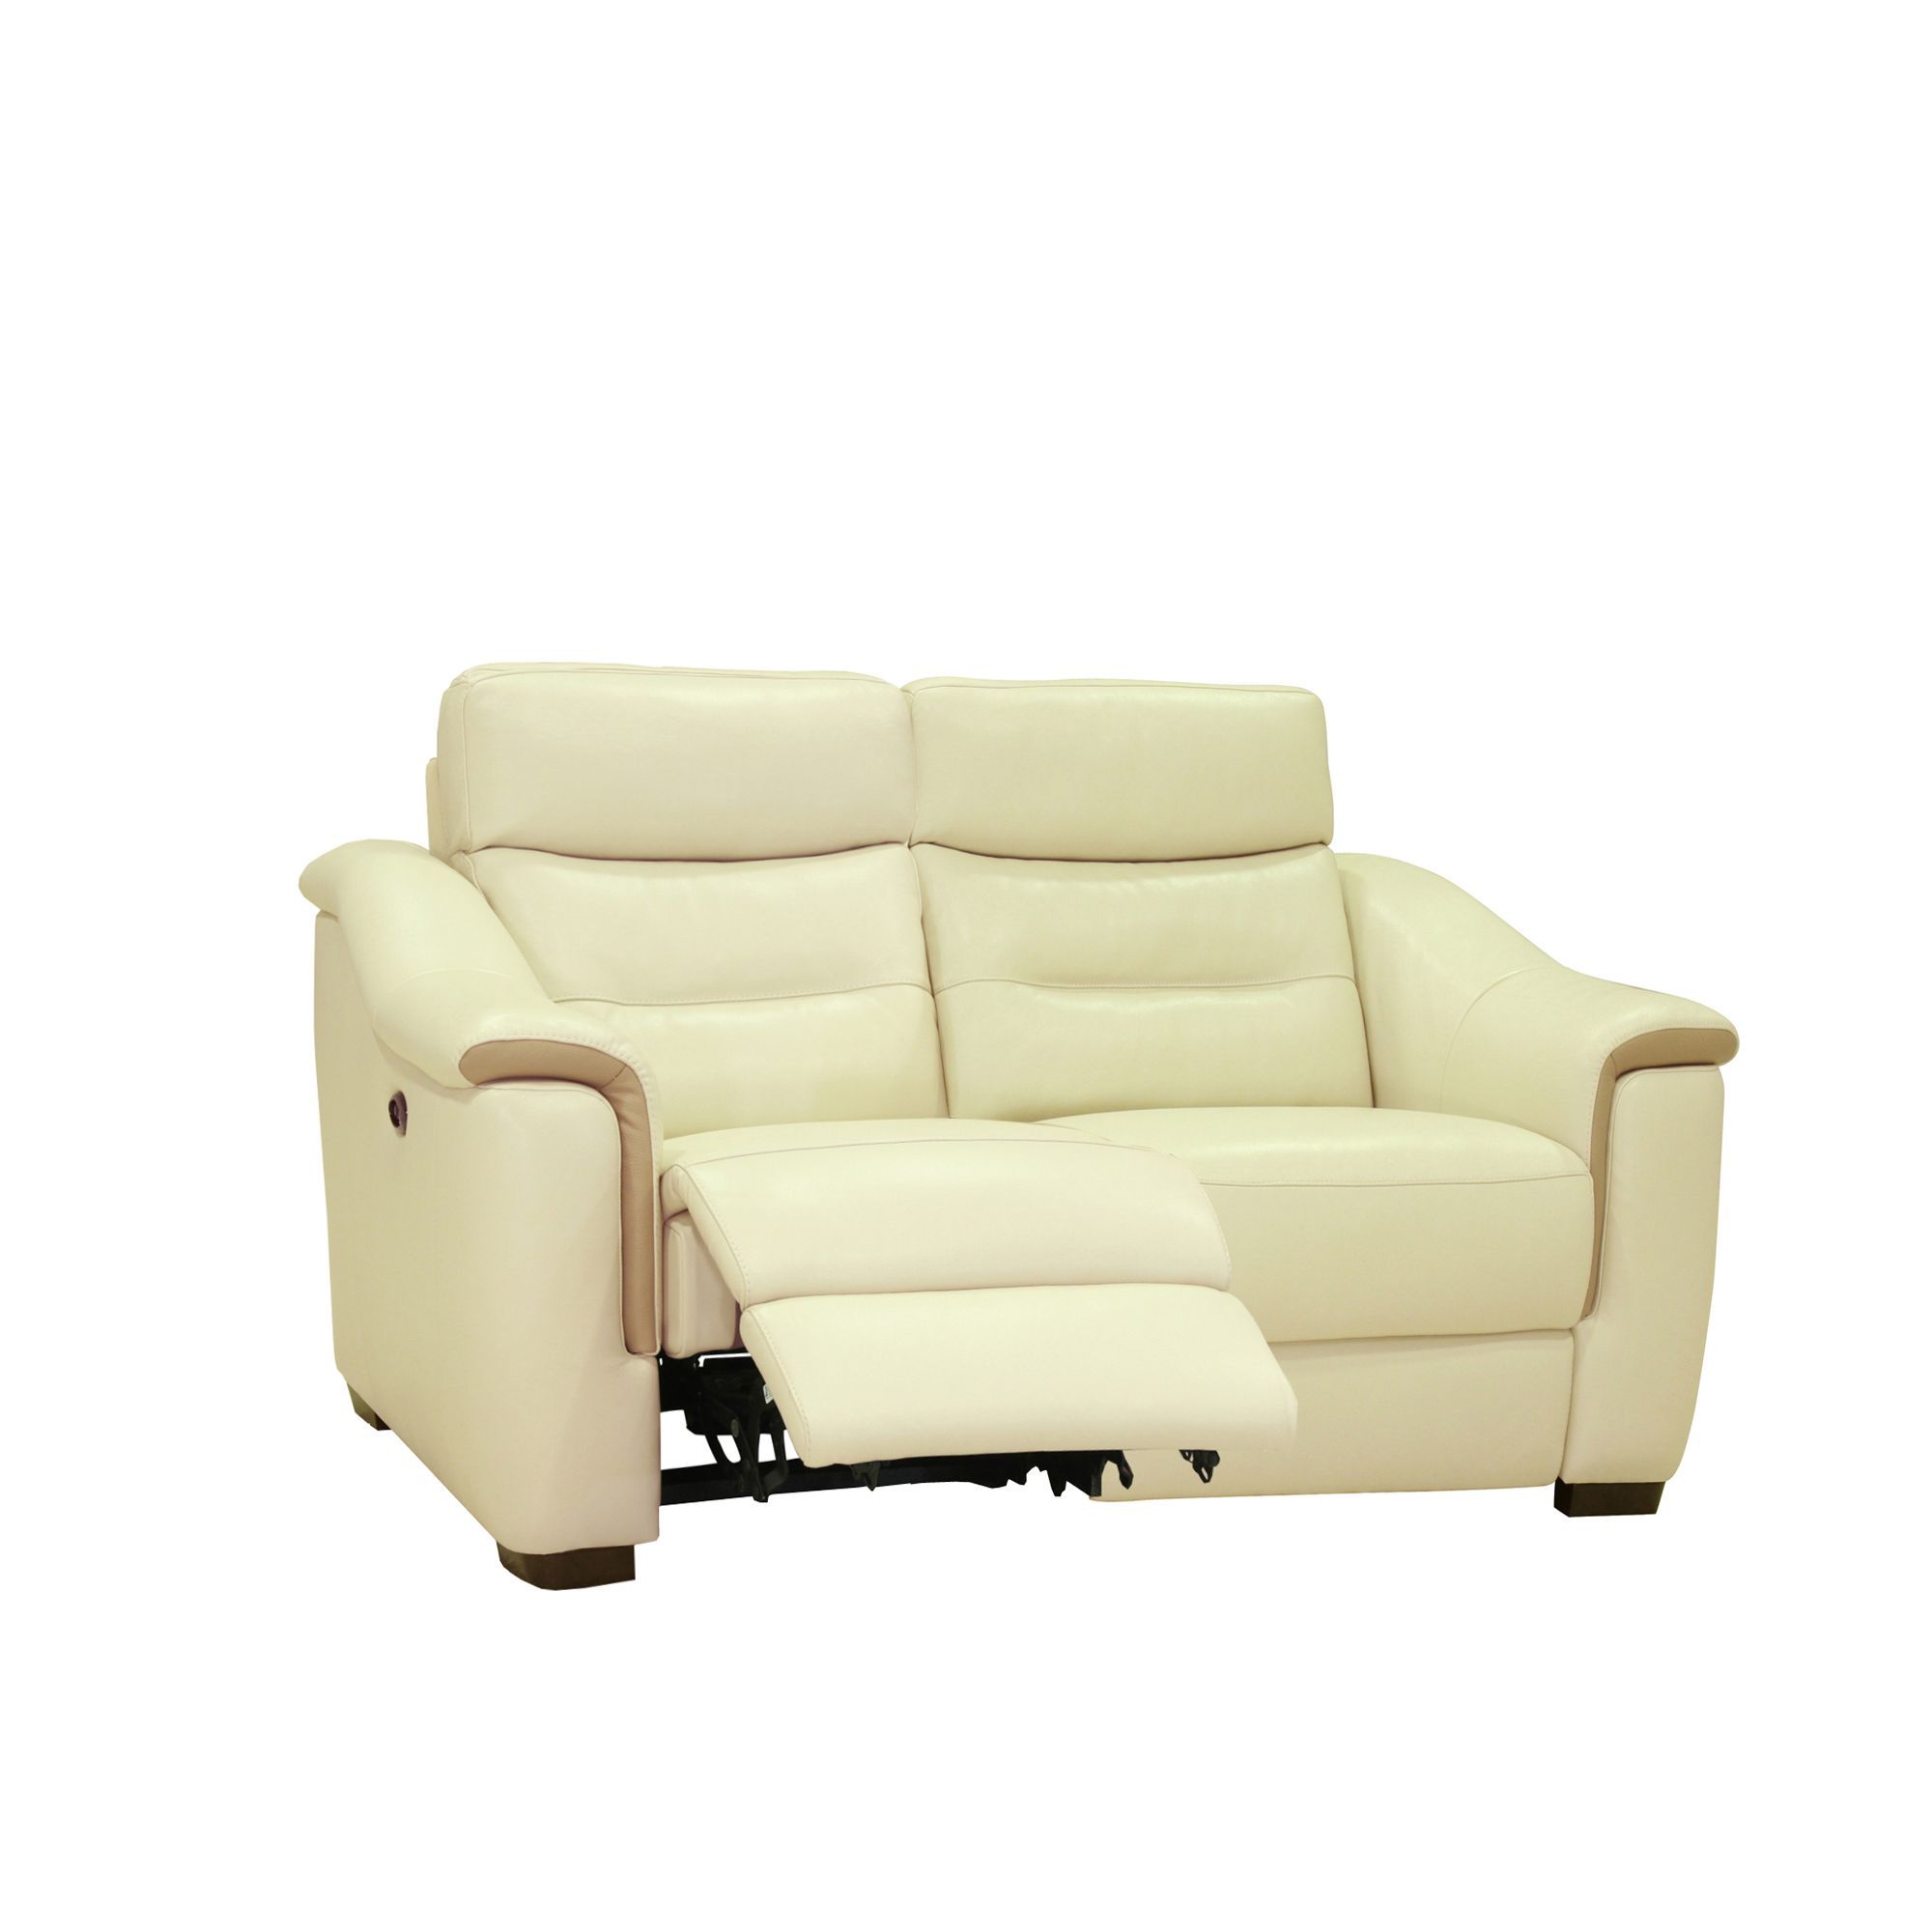 Cookes Collection Marquis 2 Seater Manual Recliner Sofa Living